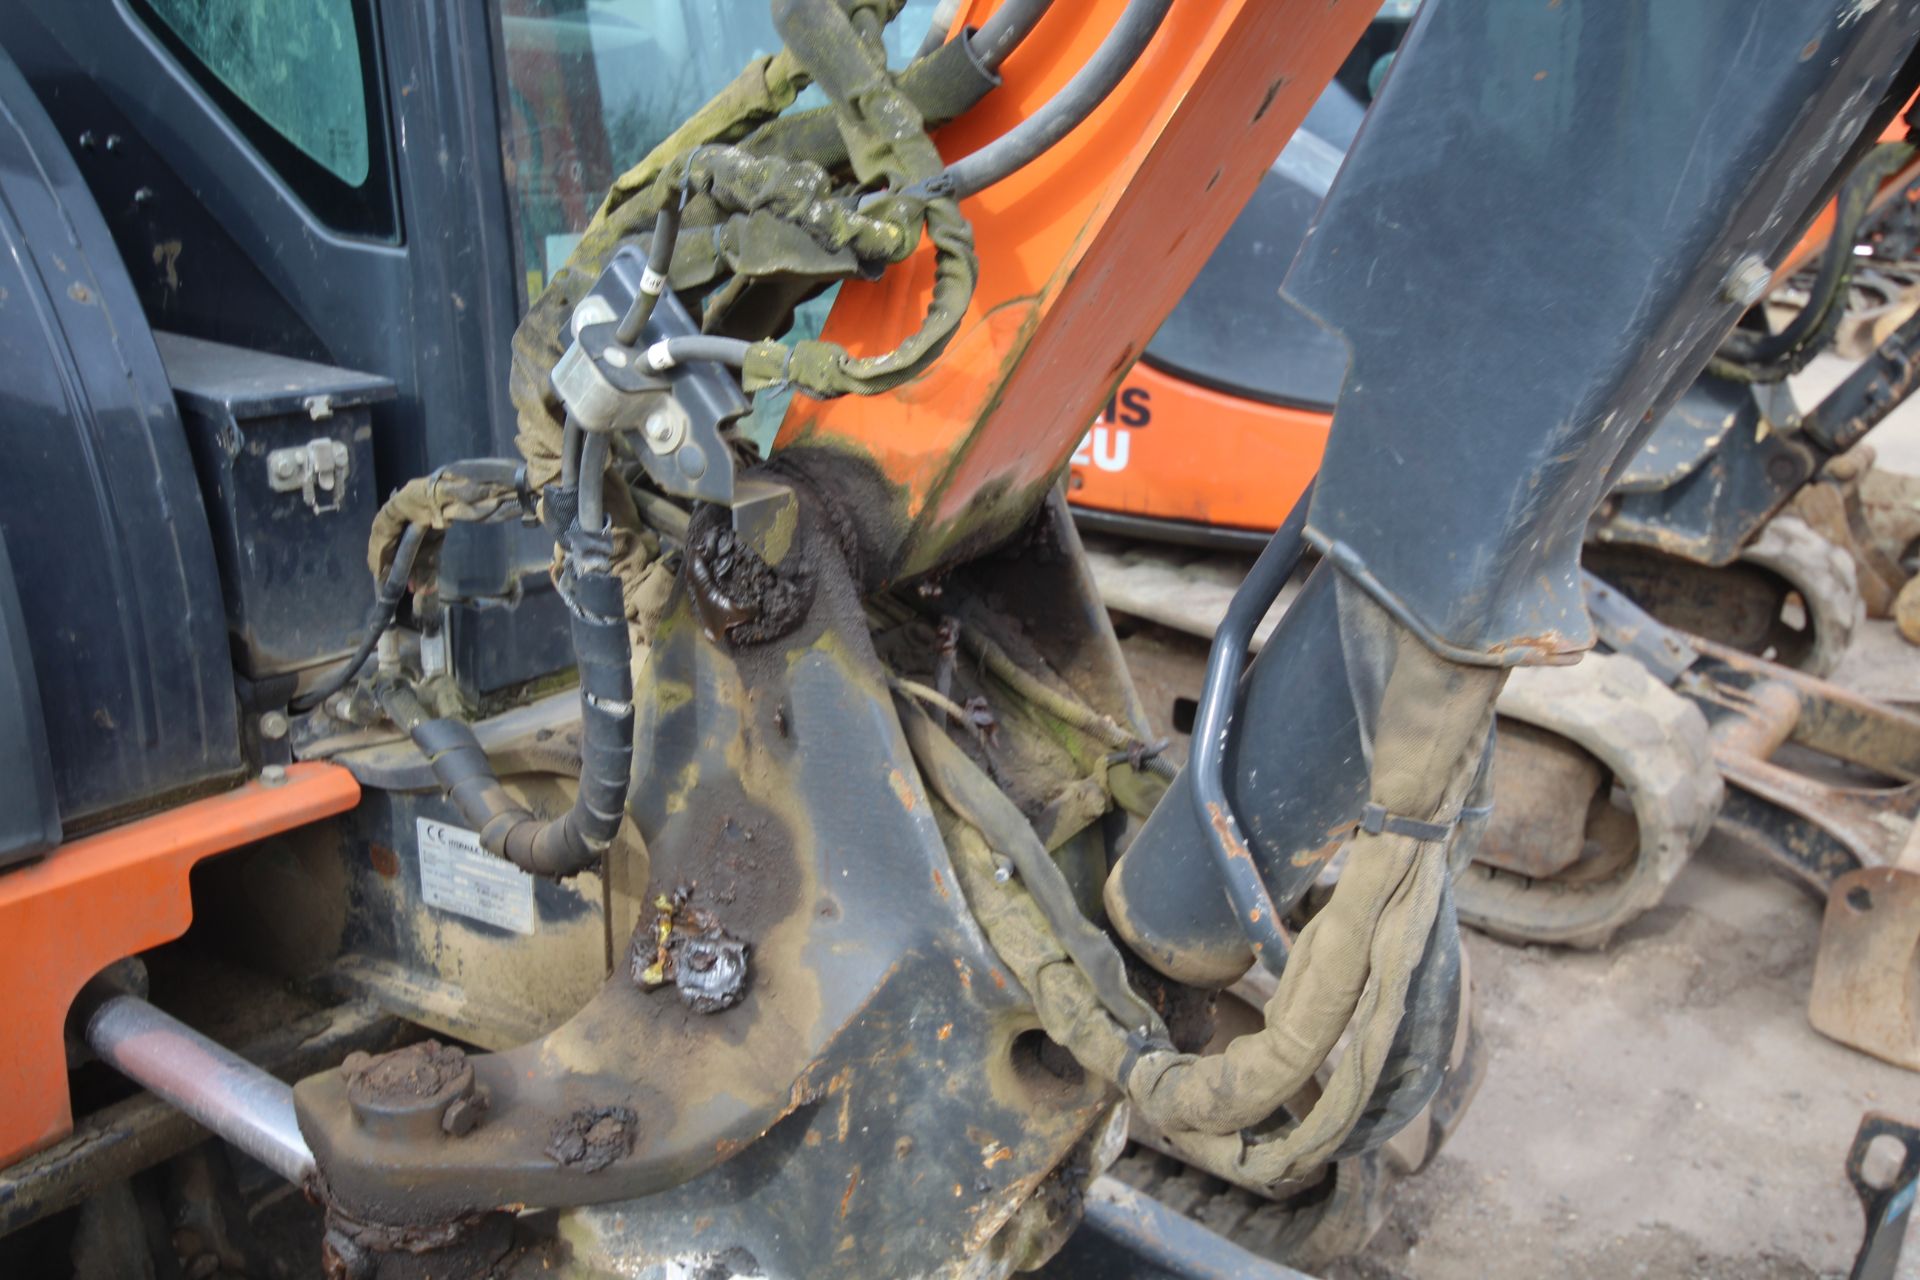 Hitachi ZX55U-5A CLR 5.5T rubber track excavator. 2018. 3,217 hours. Serial number HCMA - Image 14 of 85